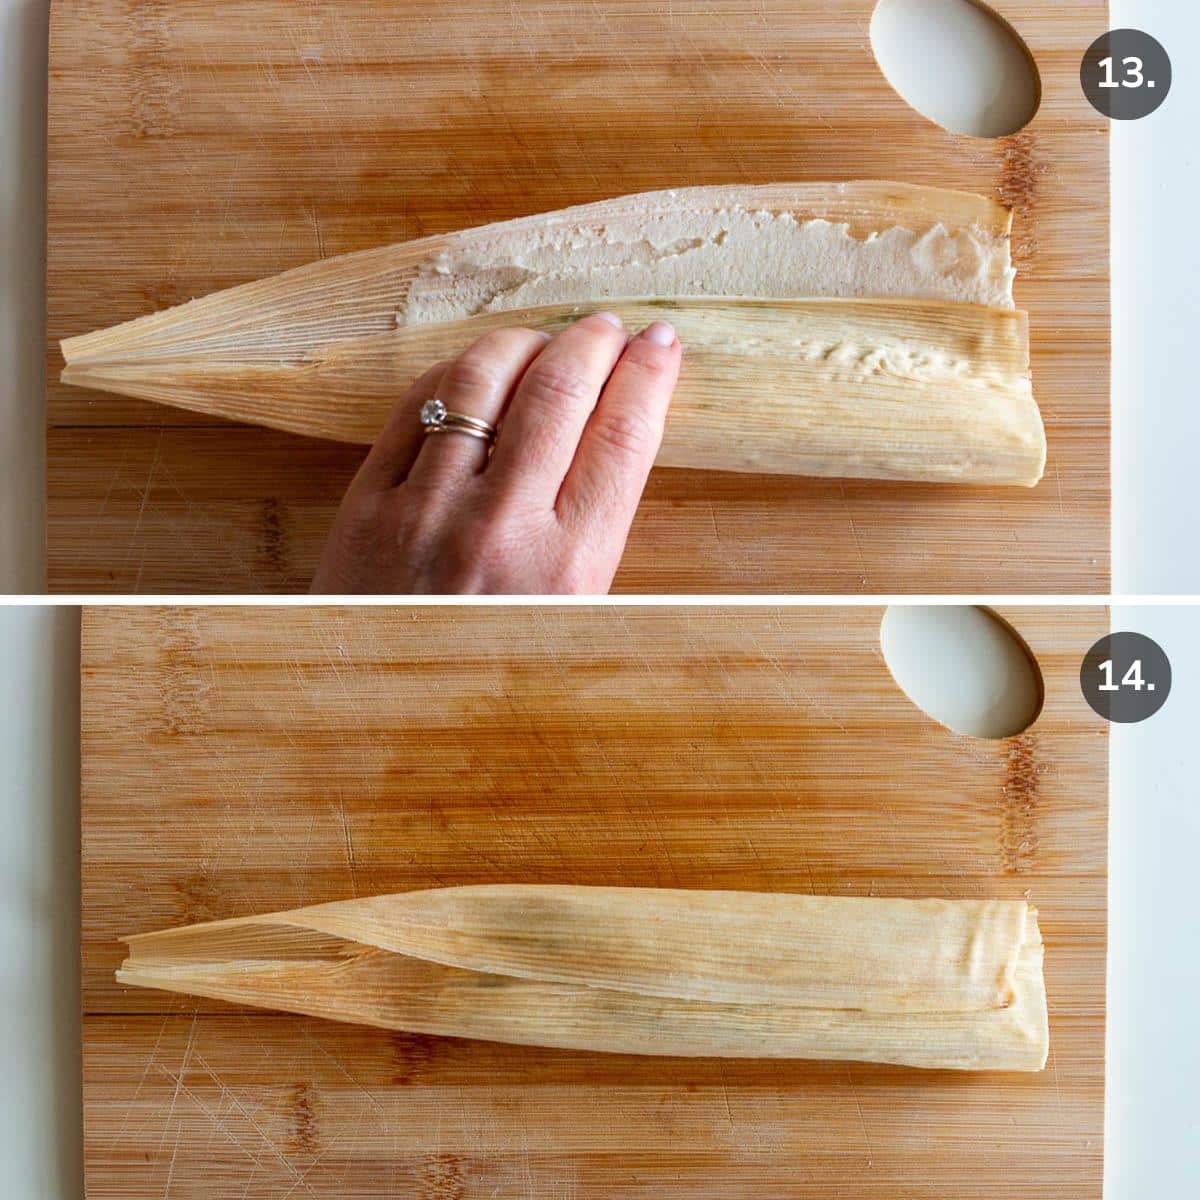 Folding the tamale over on one side and then the other.